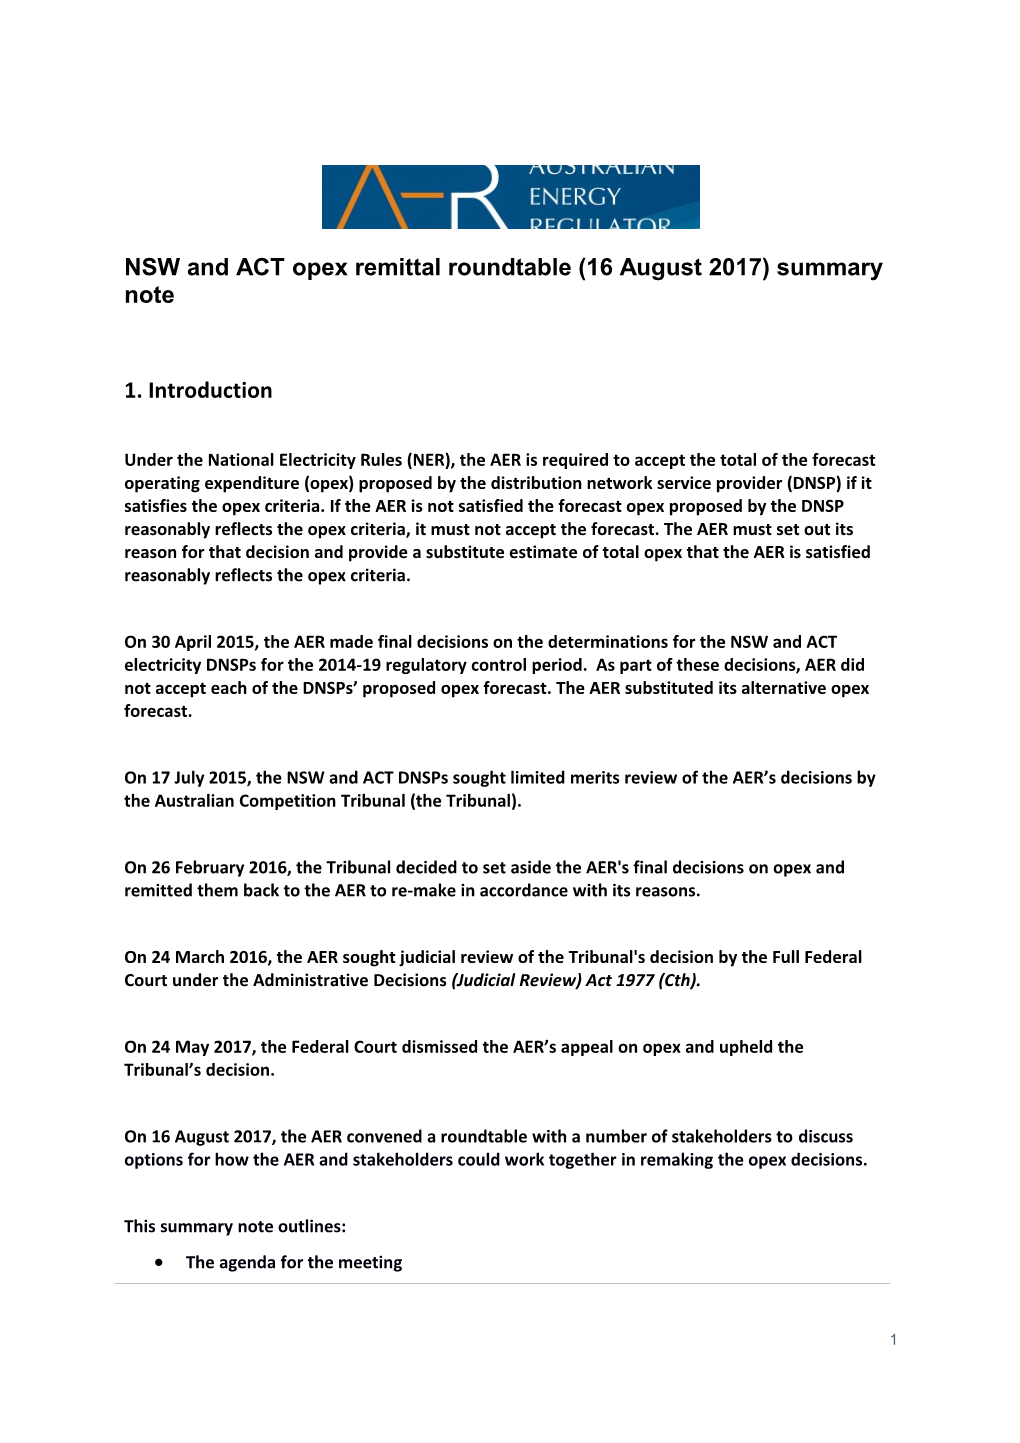 NSW and ACT Opex Remittal Roundtable (16 August 2017) Summary Note